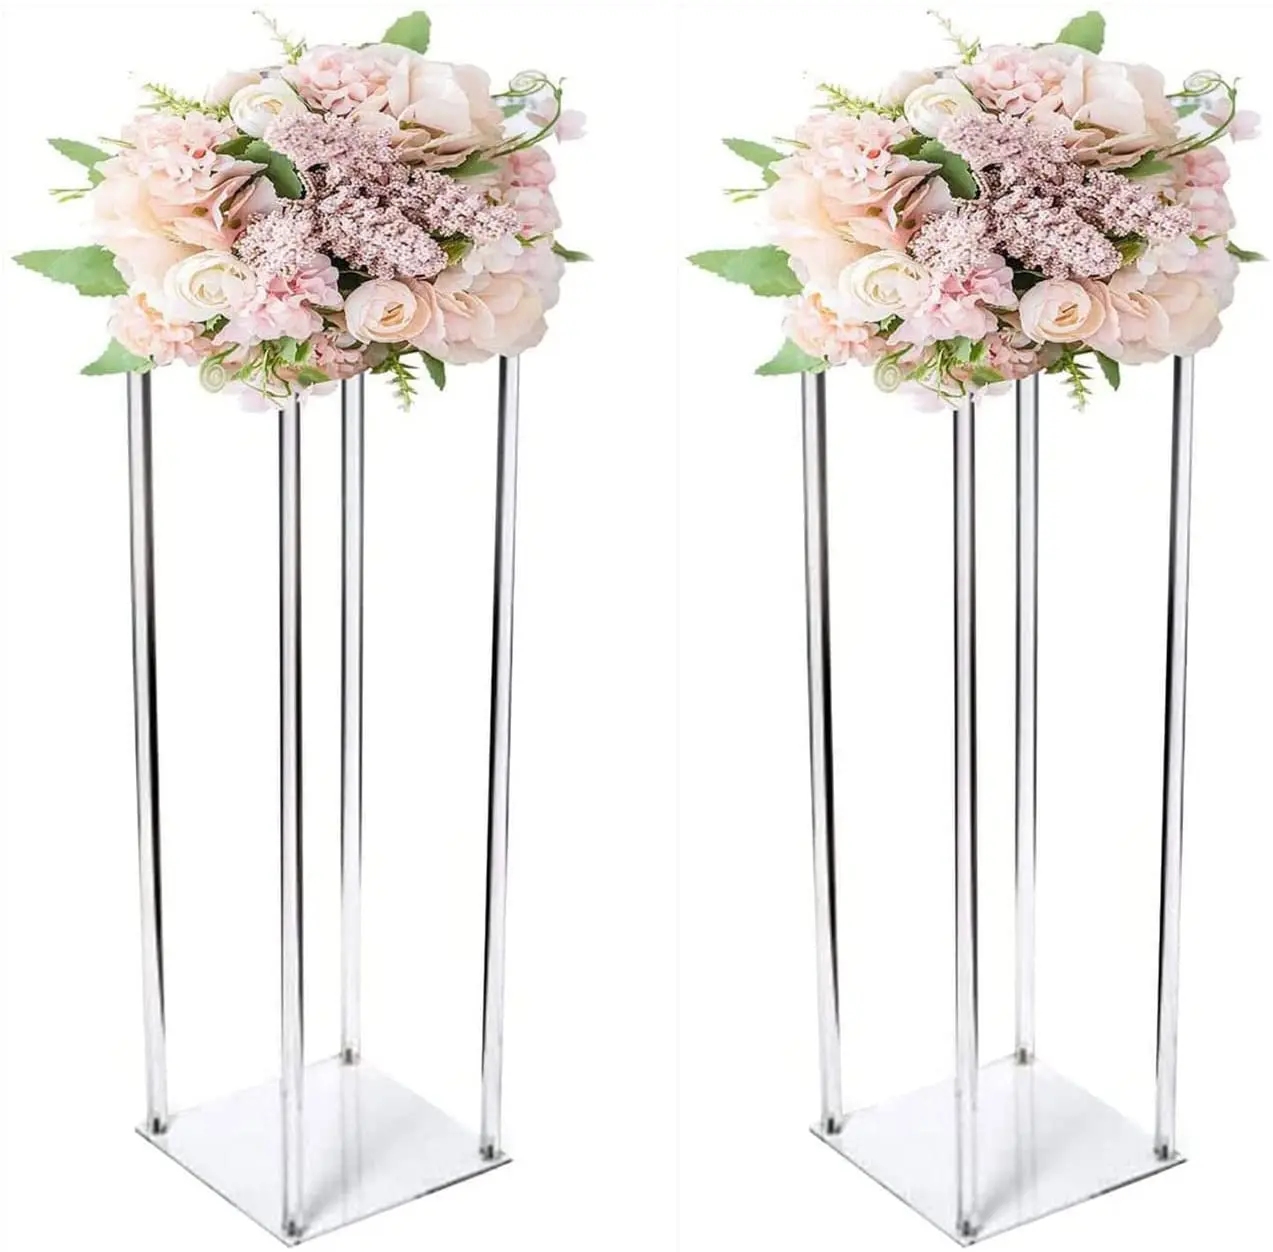 Wholesale Acrylic Flower Vase Clear Flower Vase Table Centerpiece Marriage Luxury Floral Stand Columns For Wedding Decoration